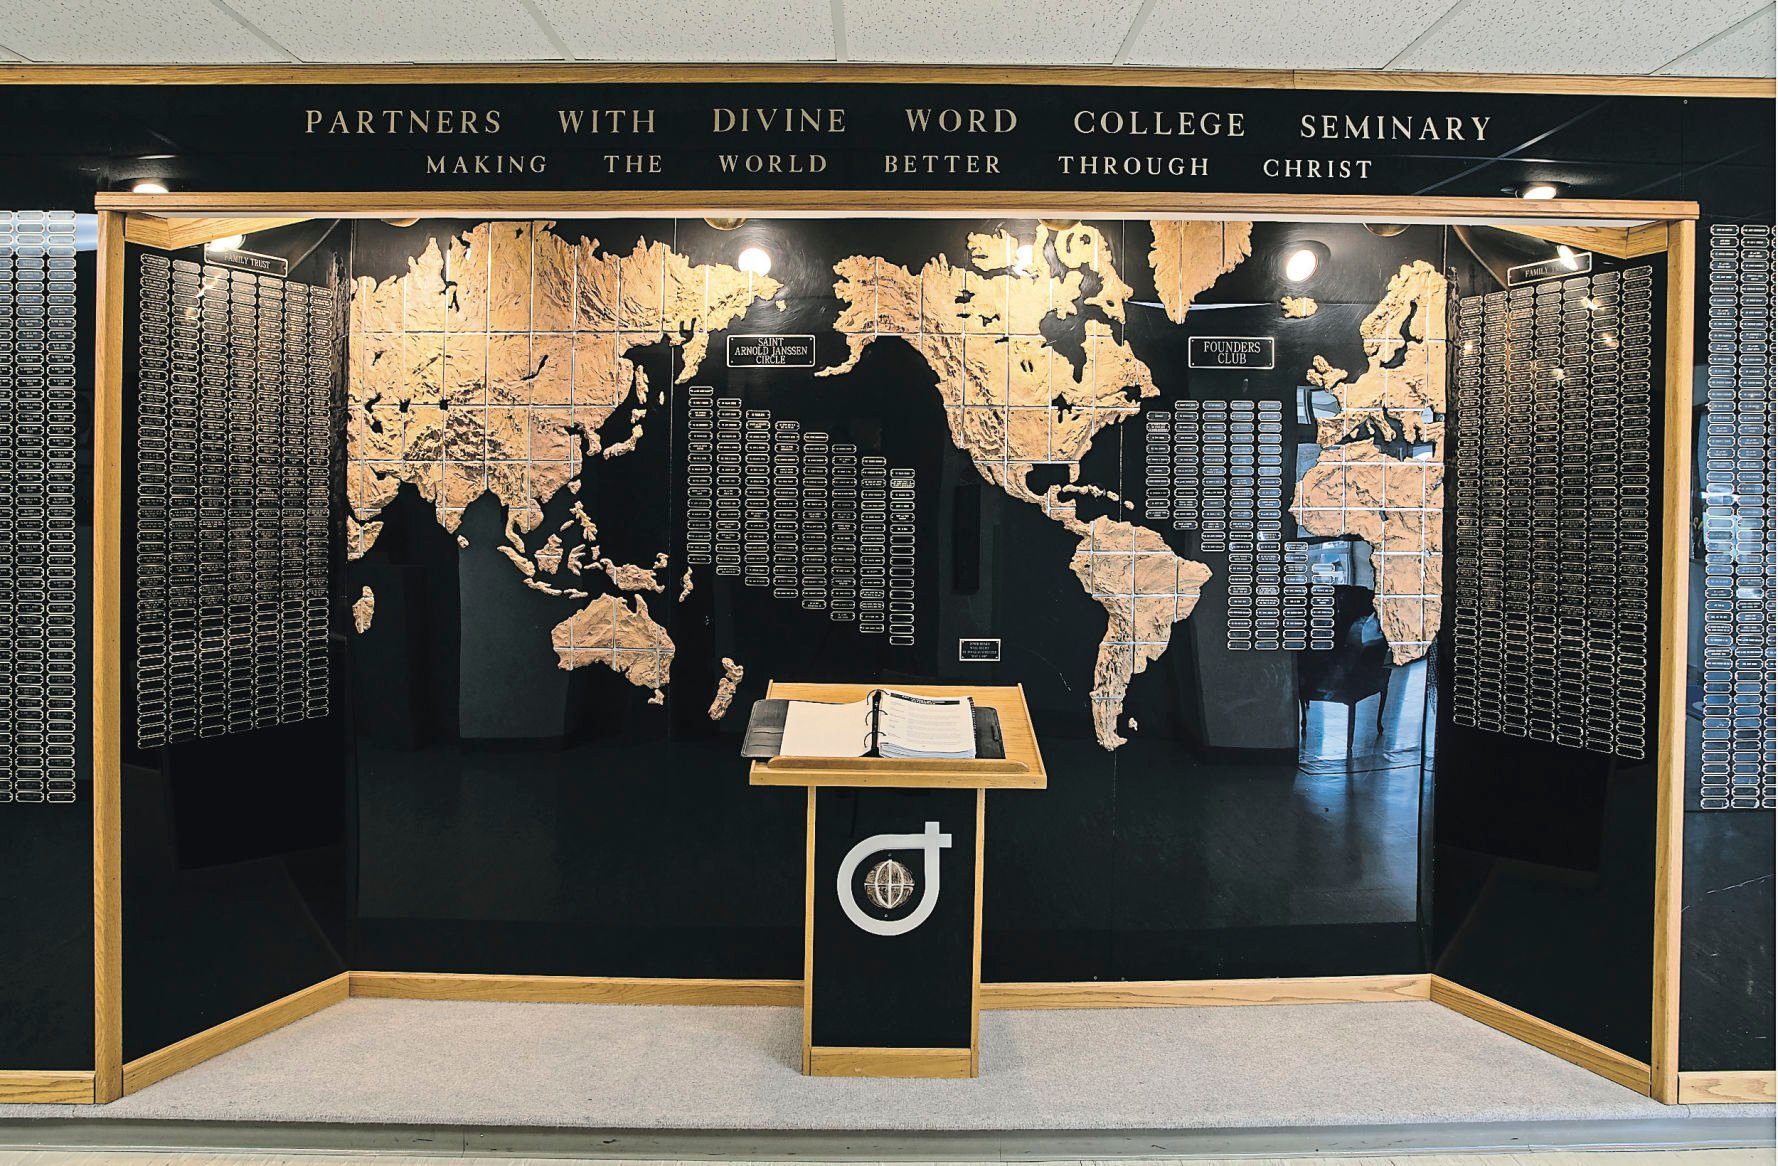 The “Partners With Divine Word College Seminary” wall at Divine Word College in Epworth, Iowa.    PHOTO CREDIT: Stephen Gassman